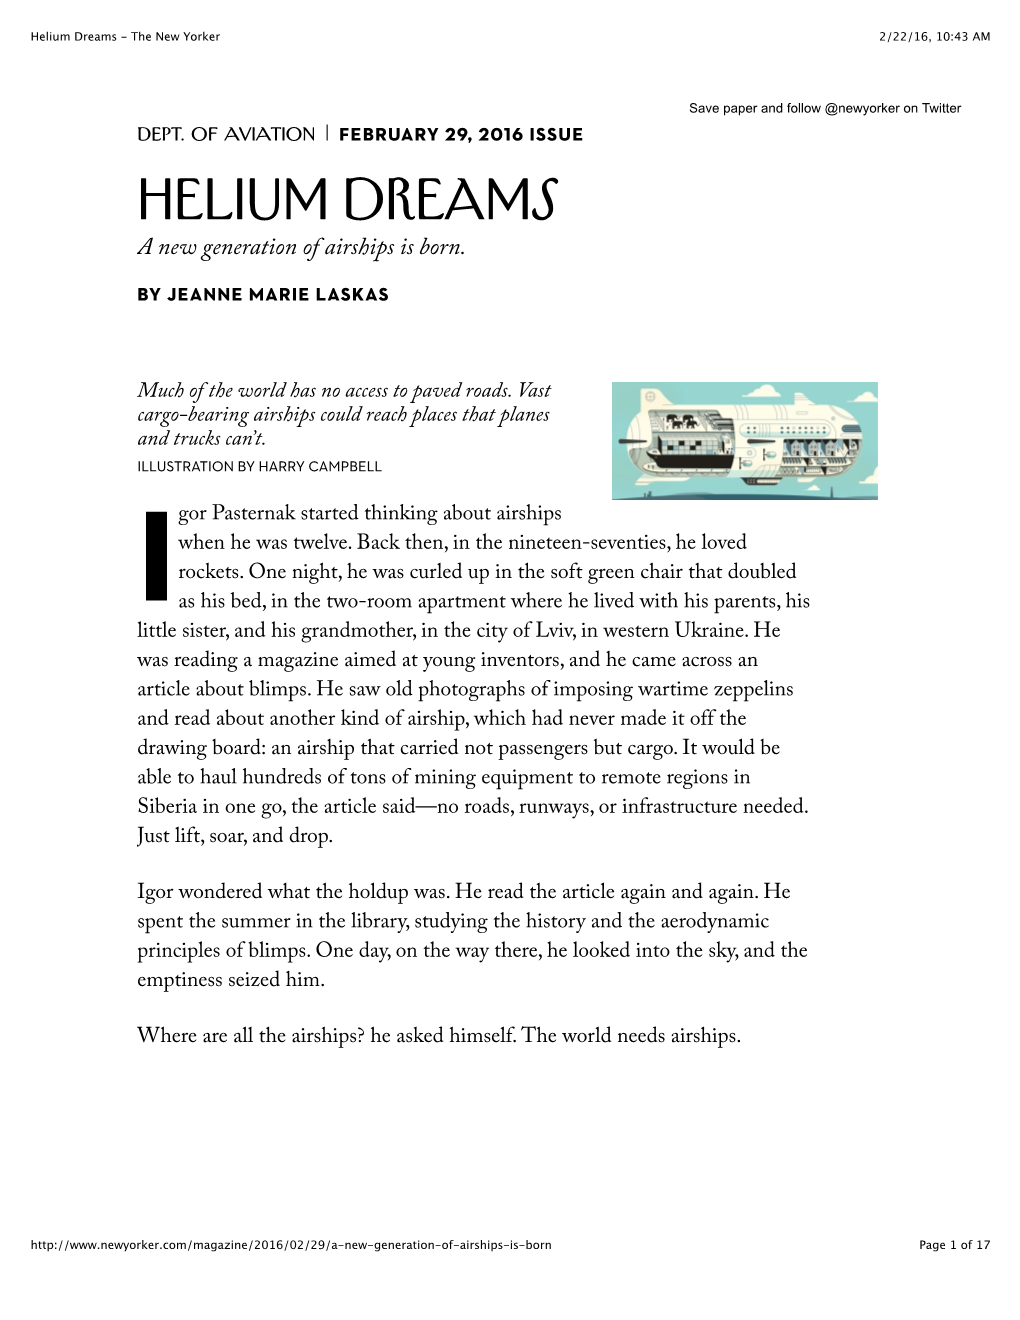 Helium Dreams - the New Yorker 2/22/16, 10:43 AM